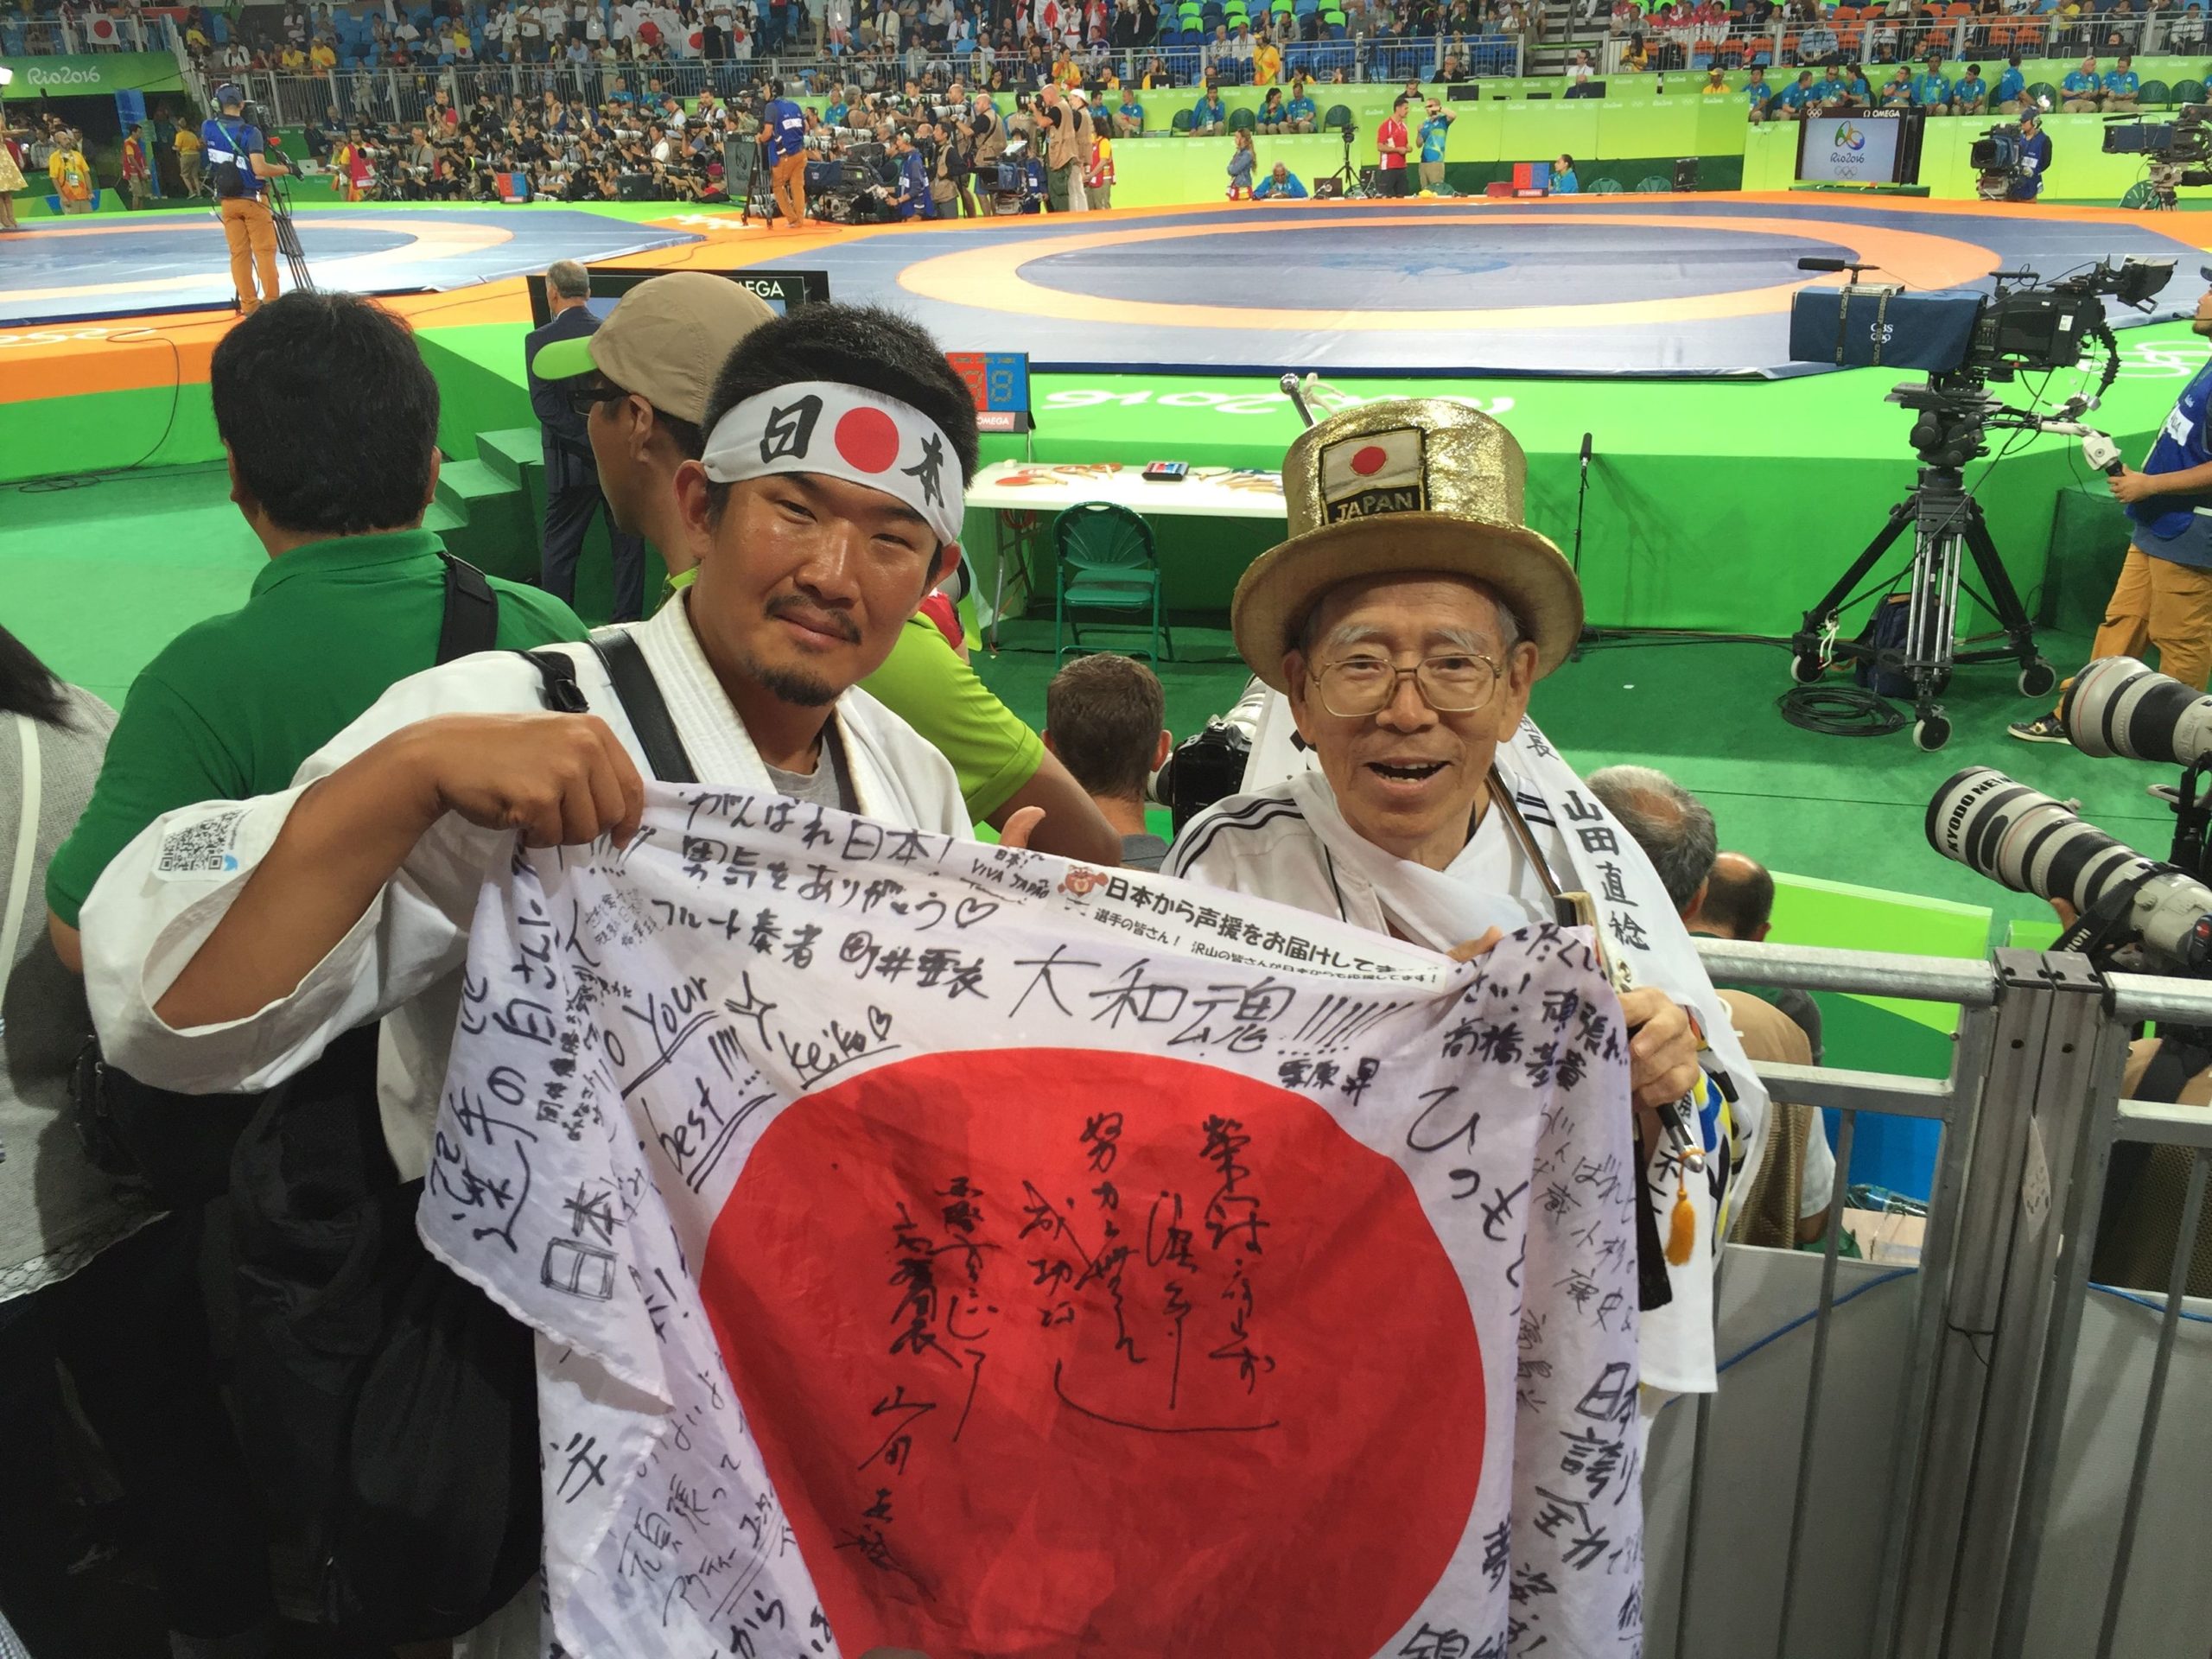 FILE PHOTO: Kazunori Takishima poses with a Japanese fan at a wrestling venue of the Rio 2016 Olympic Games in Rio de Janeiro, Brazil, August 18, 2016